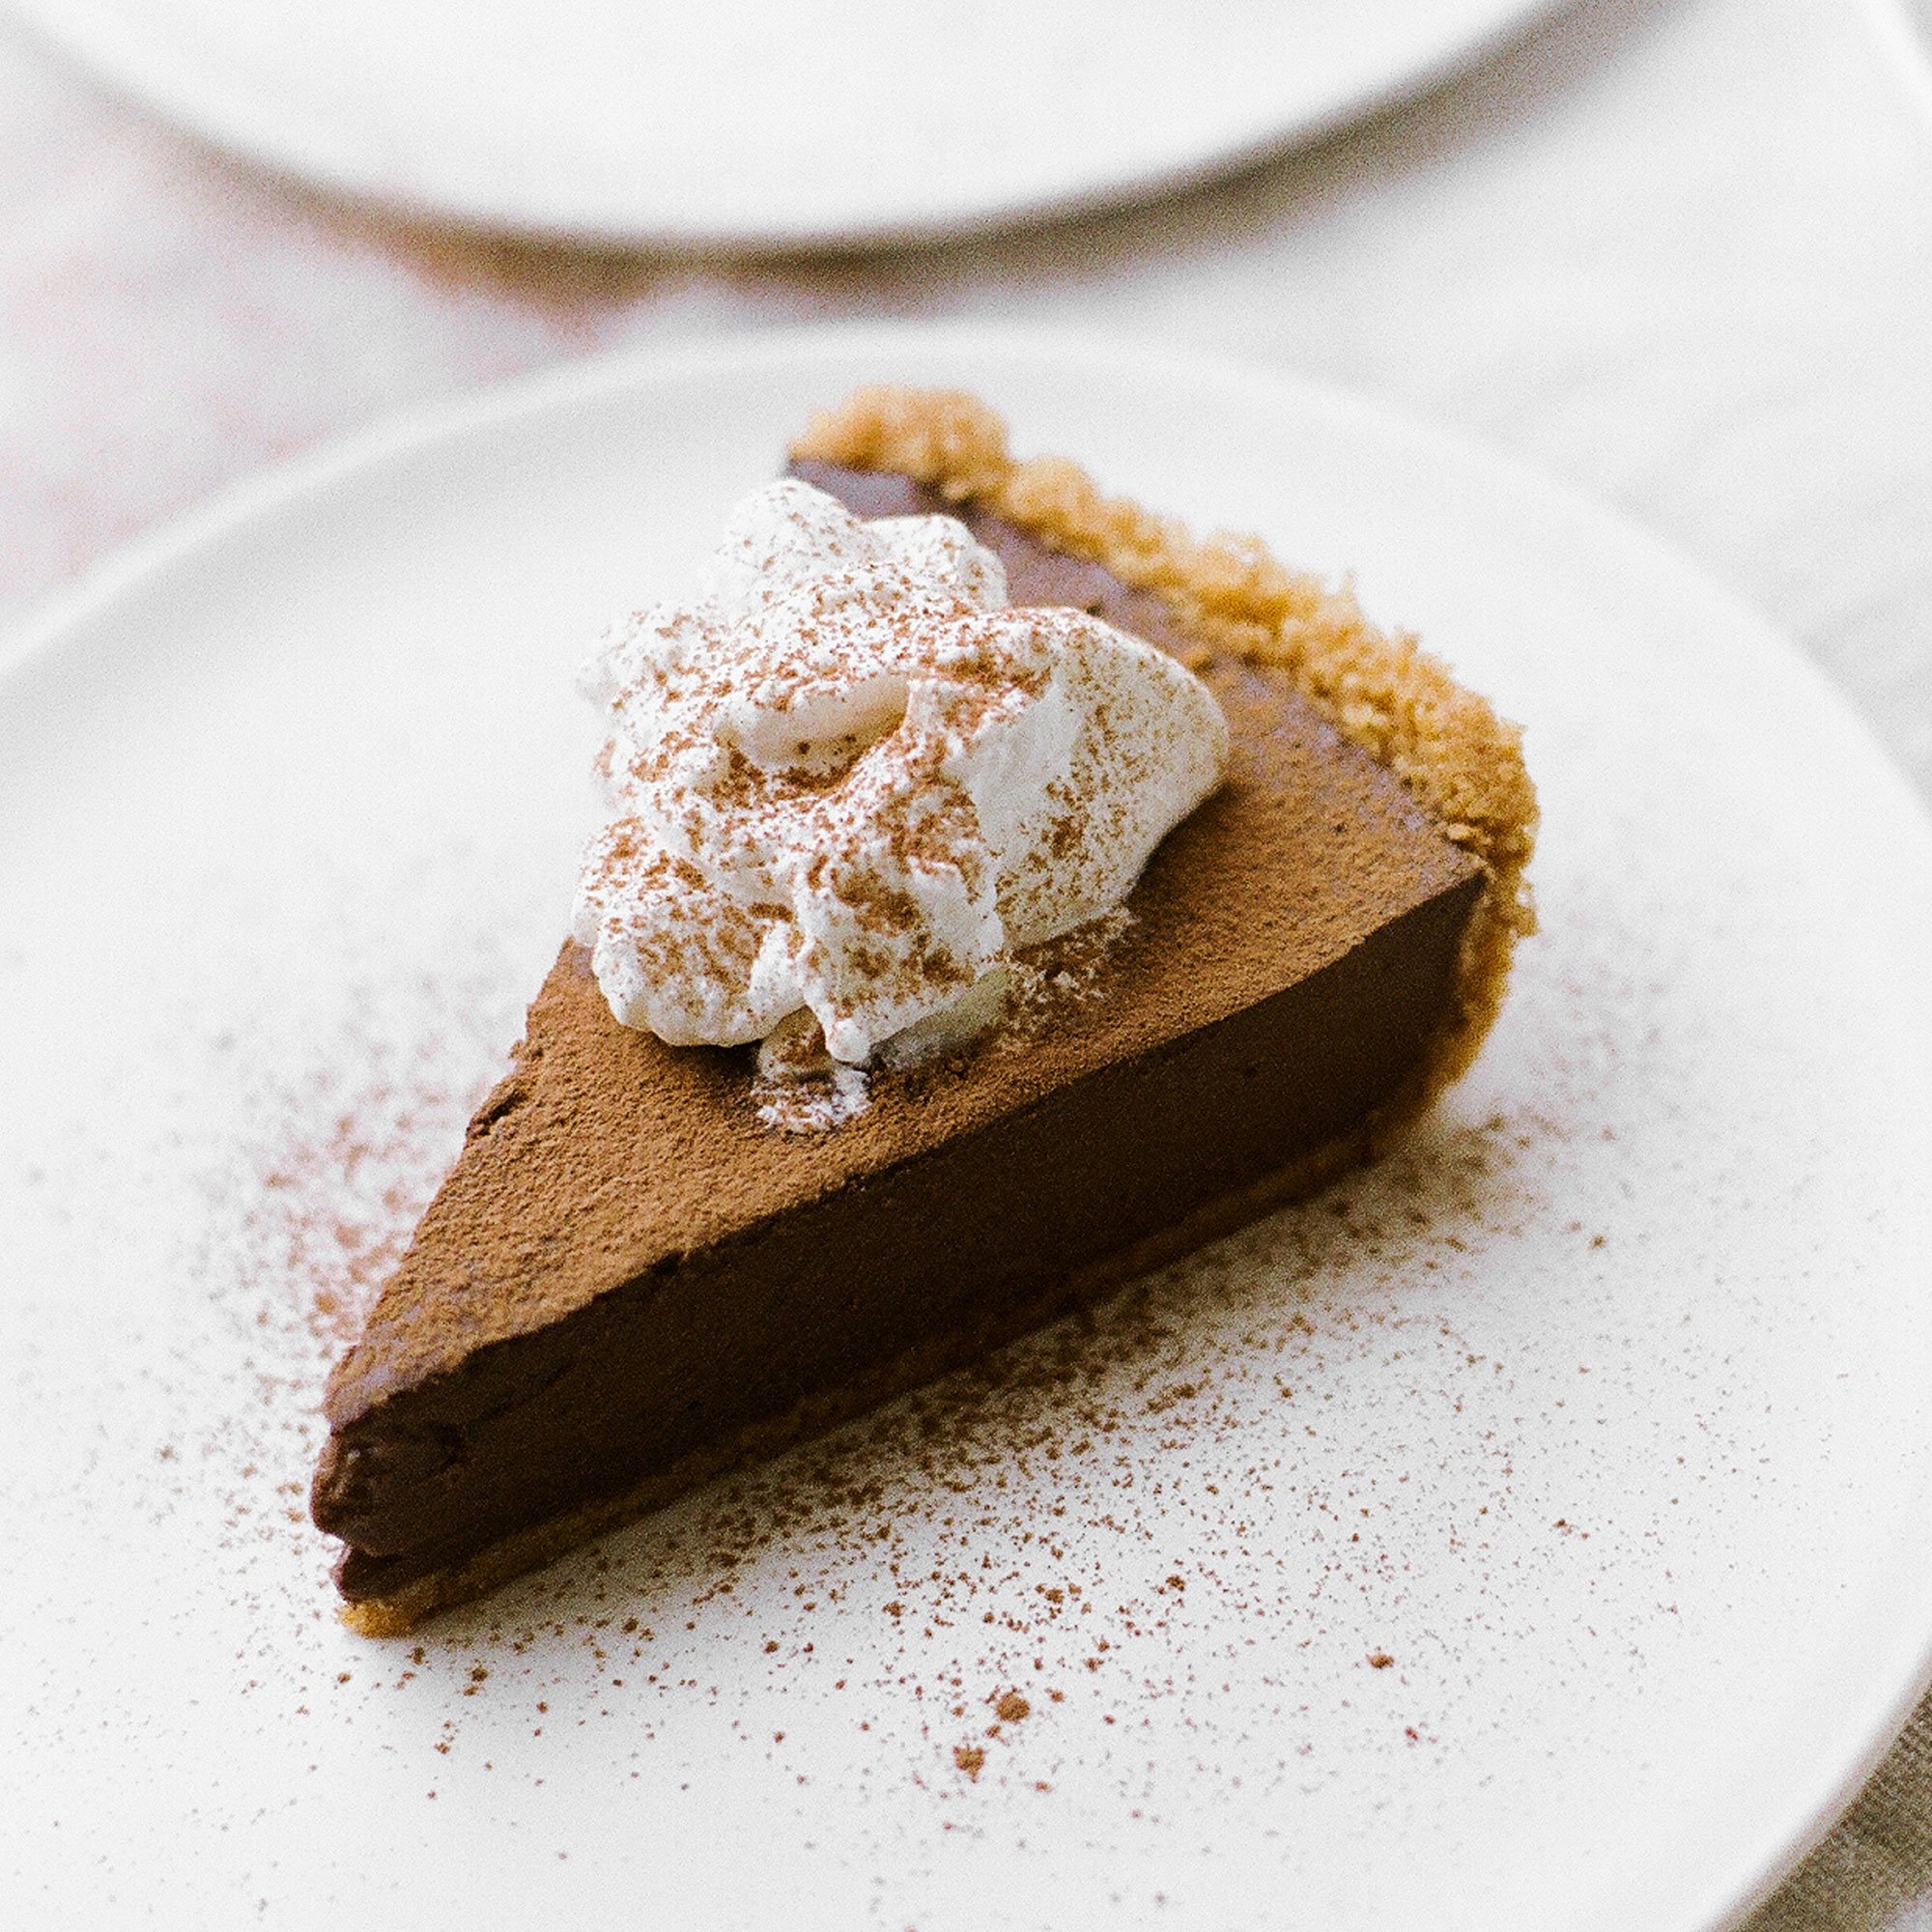 One of my all-time favorites, this Chocolate Pudding Pie features a graham cracker crust, rich double chocolate pudding filling, and whipped cream on top!